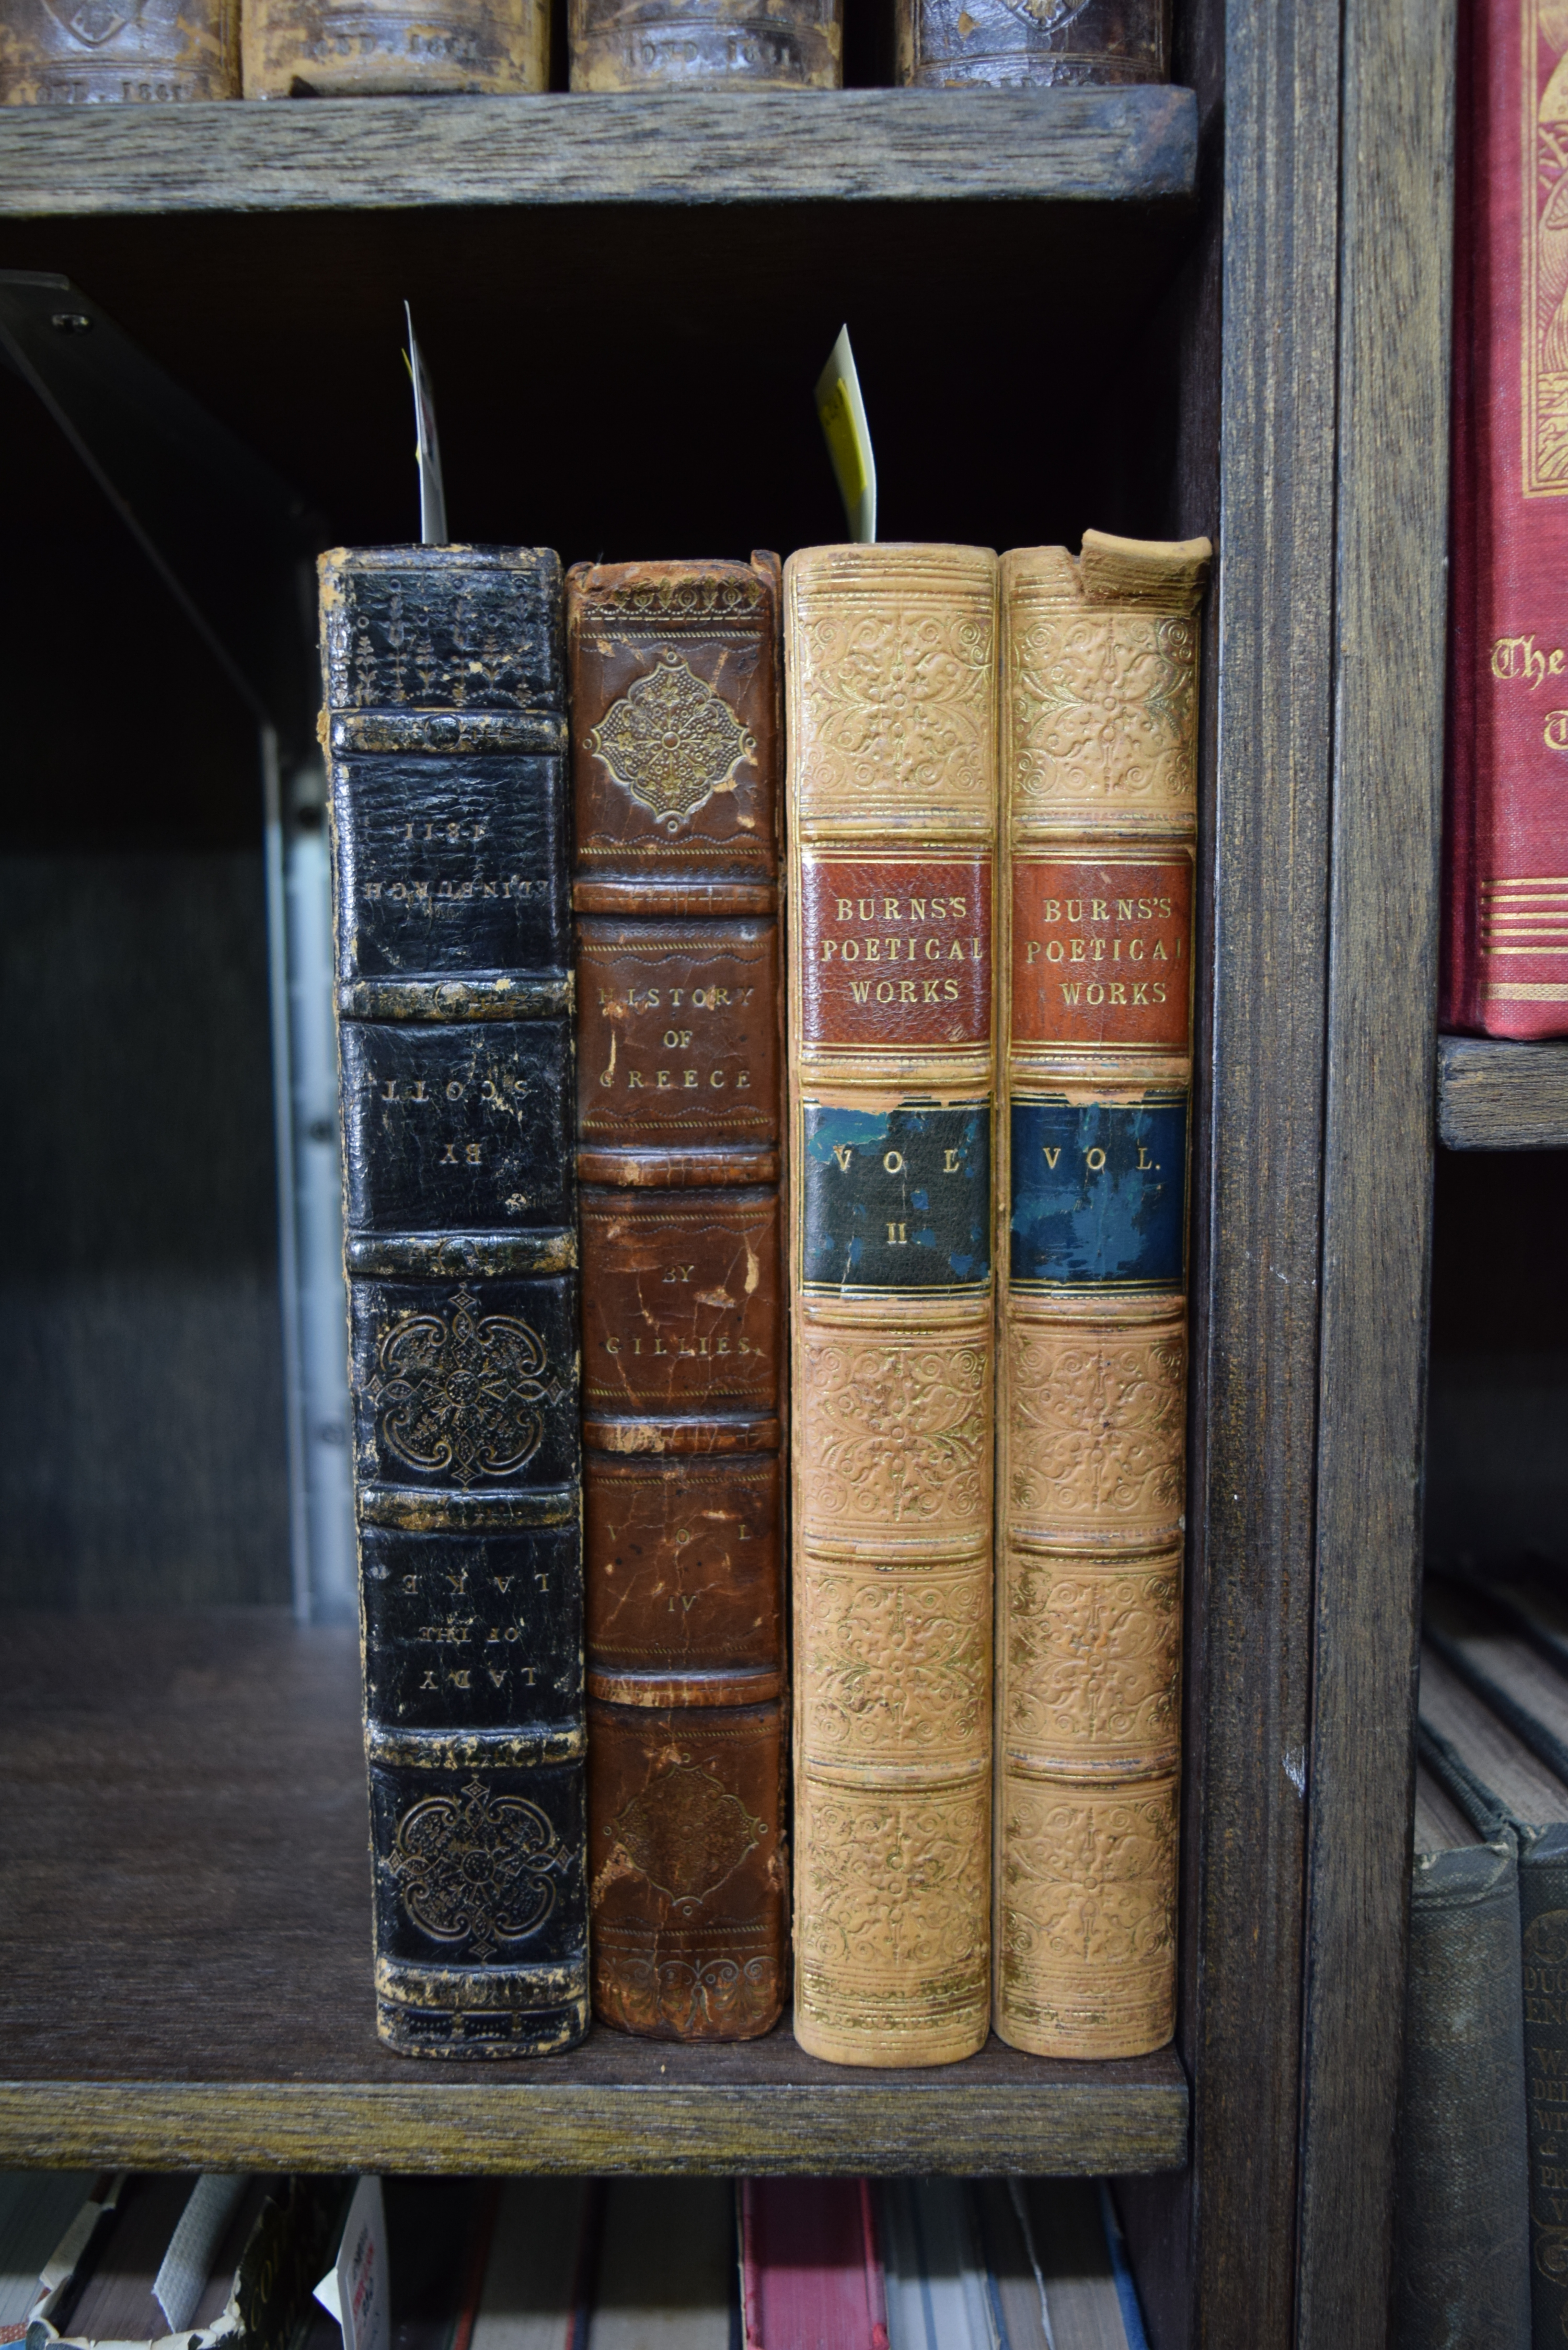 BINDINGS: a group of 22 volumes, 19th century literature and history in contemp. - Image 2 of 2